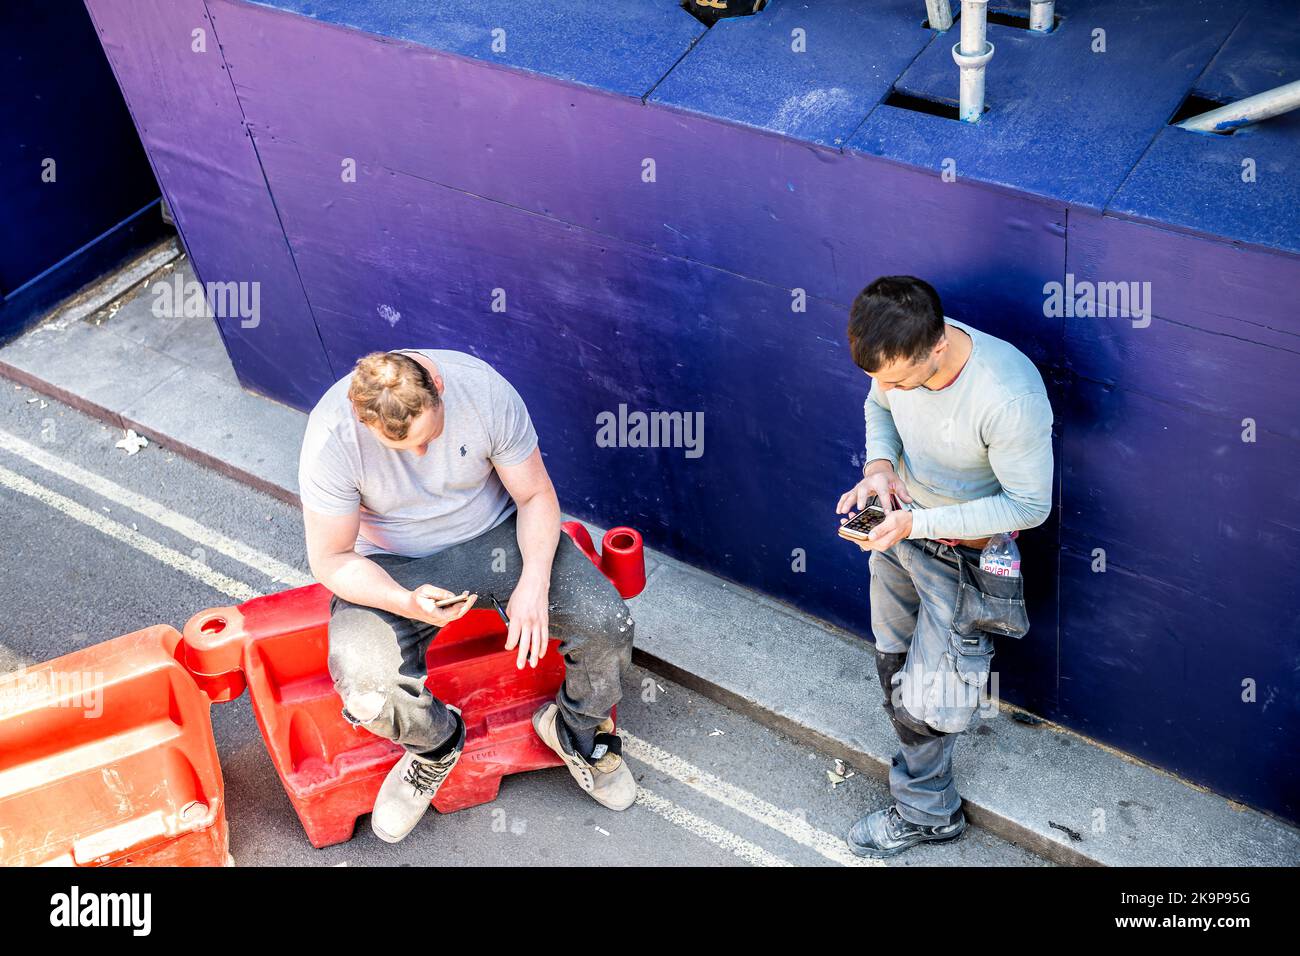 London, United Kingdom - June 22, 2018: Two construction workers men taking lunch break, using phones outside on street of city of Westminster Stock Photo